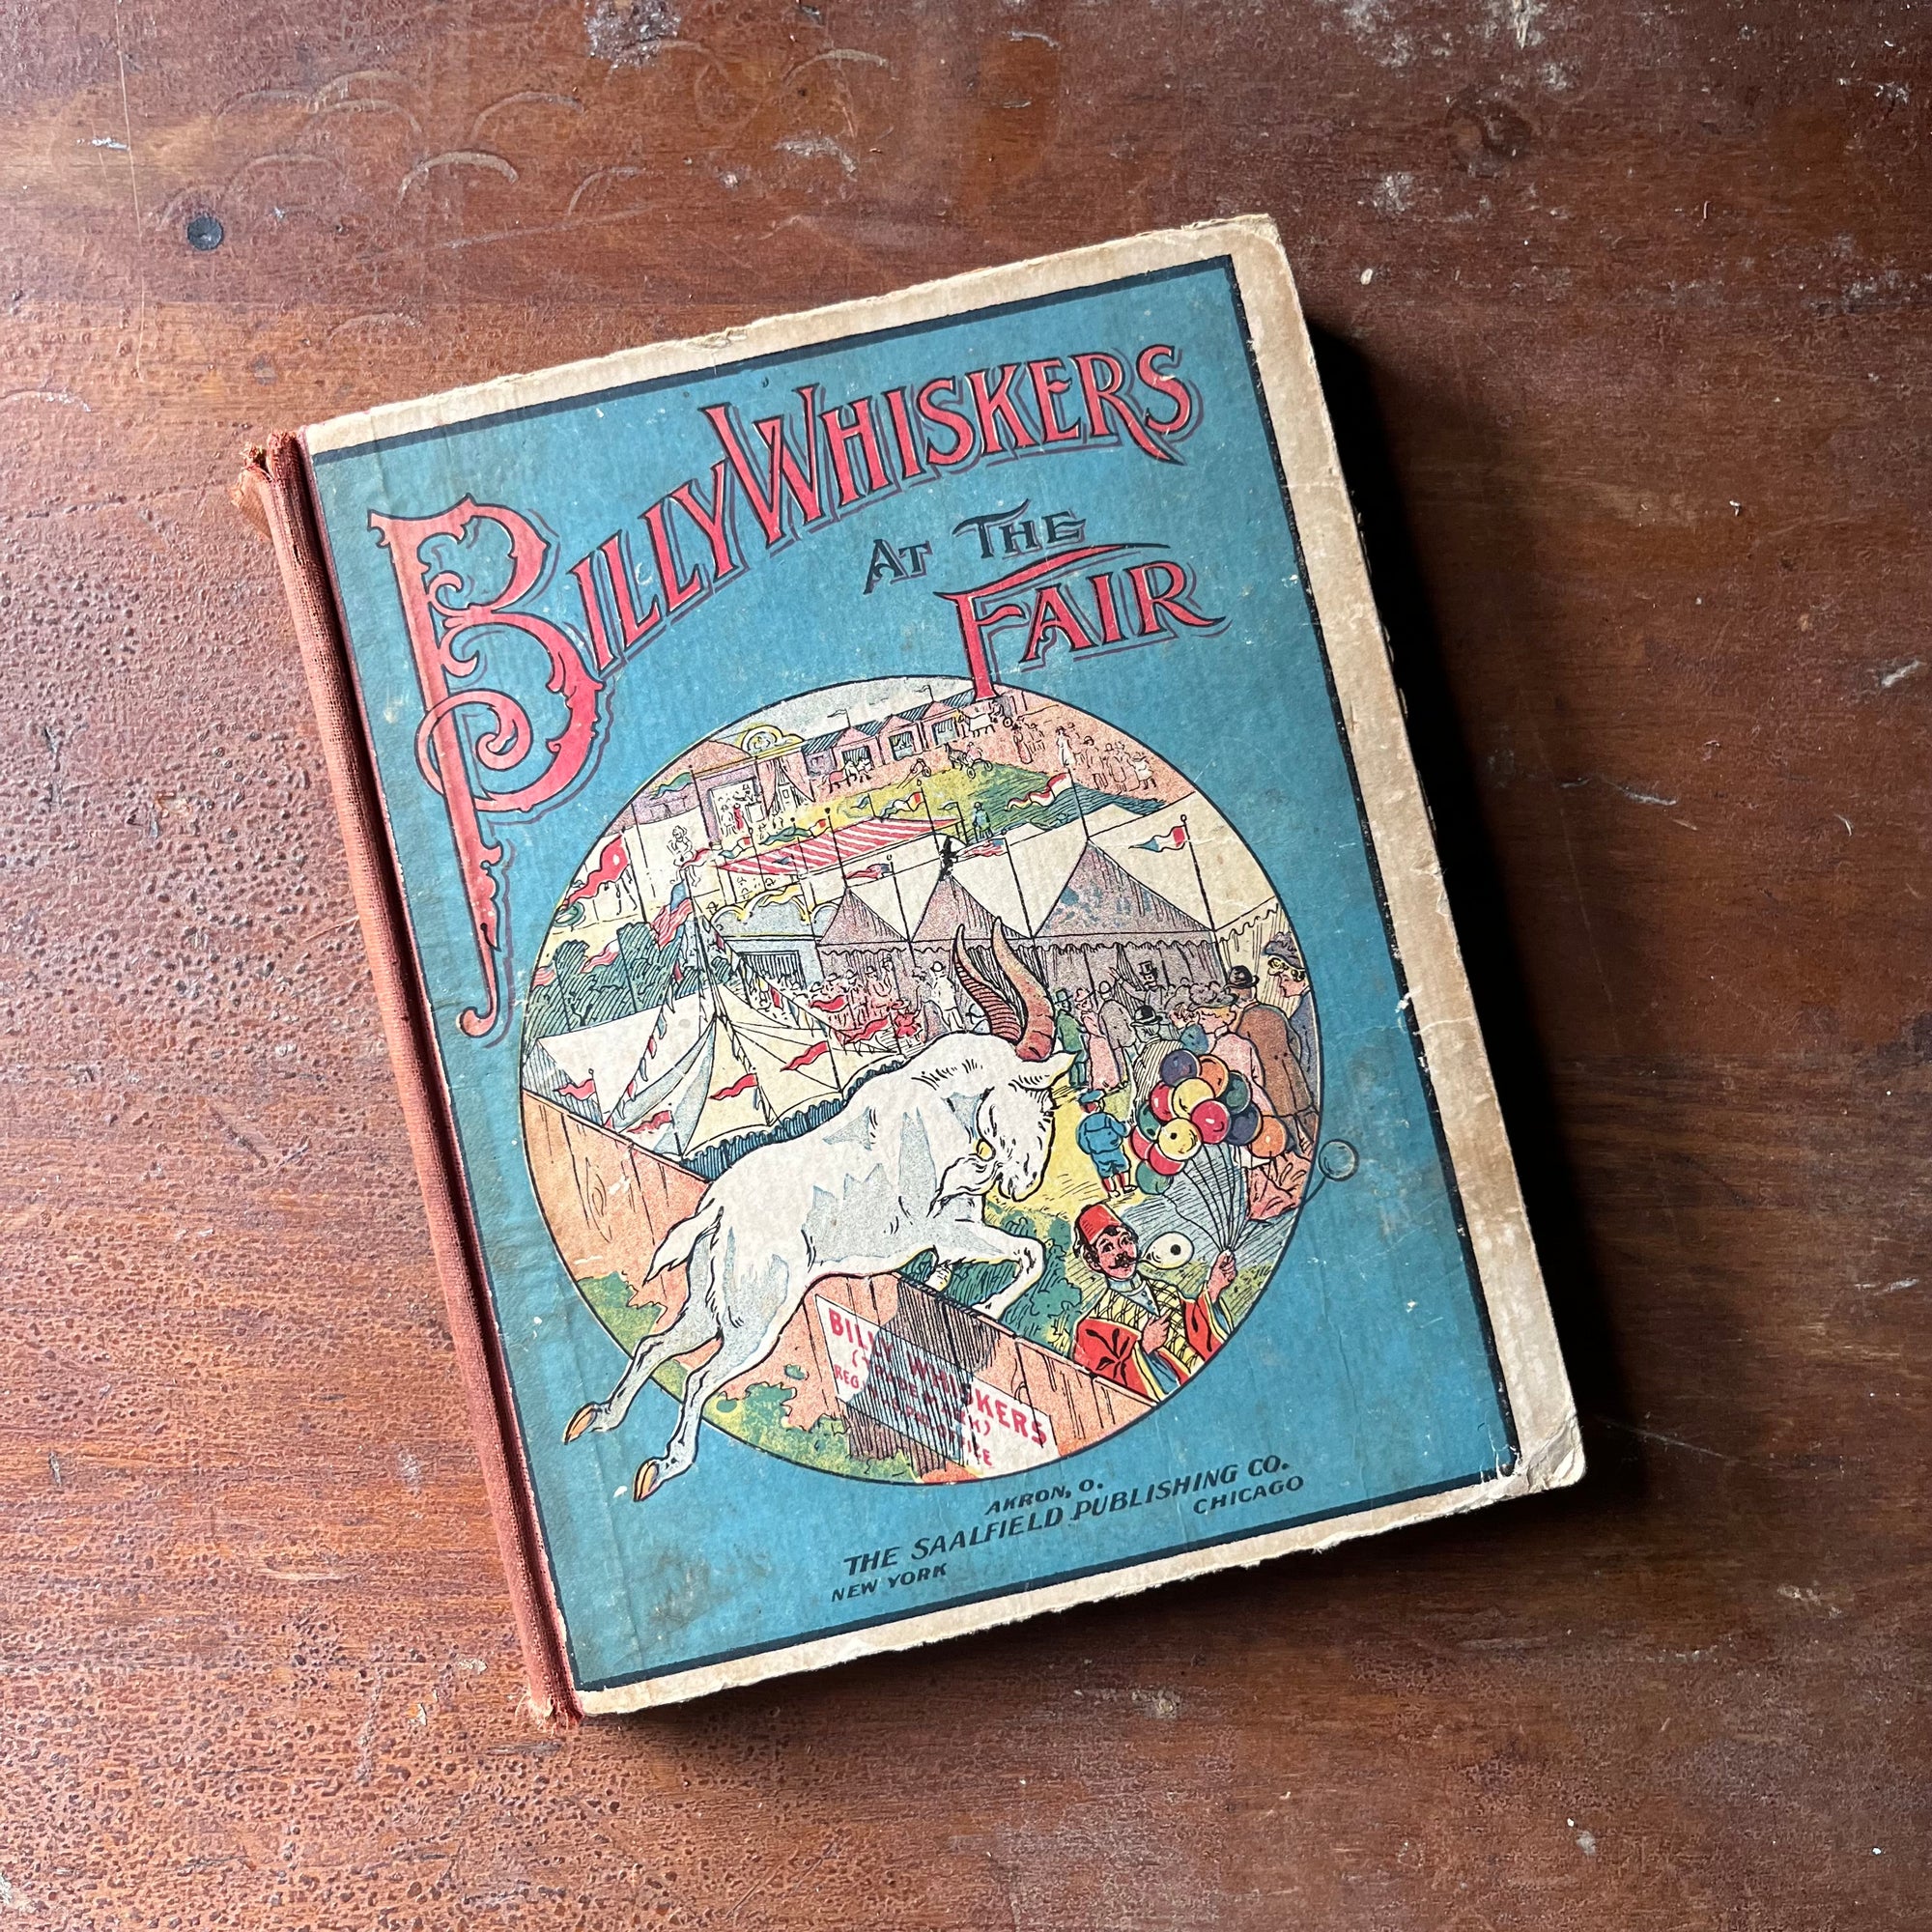 vintage children's chapter book, antique children's book, antiquarian book - Bill Whiskers Goes to the Fair written by F. G. Wheeler with illustrations by Arthur De Bebian - view of the front cover with an illustration of Billy Whiskers jumping over a fence at the fair